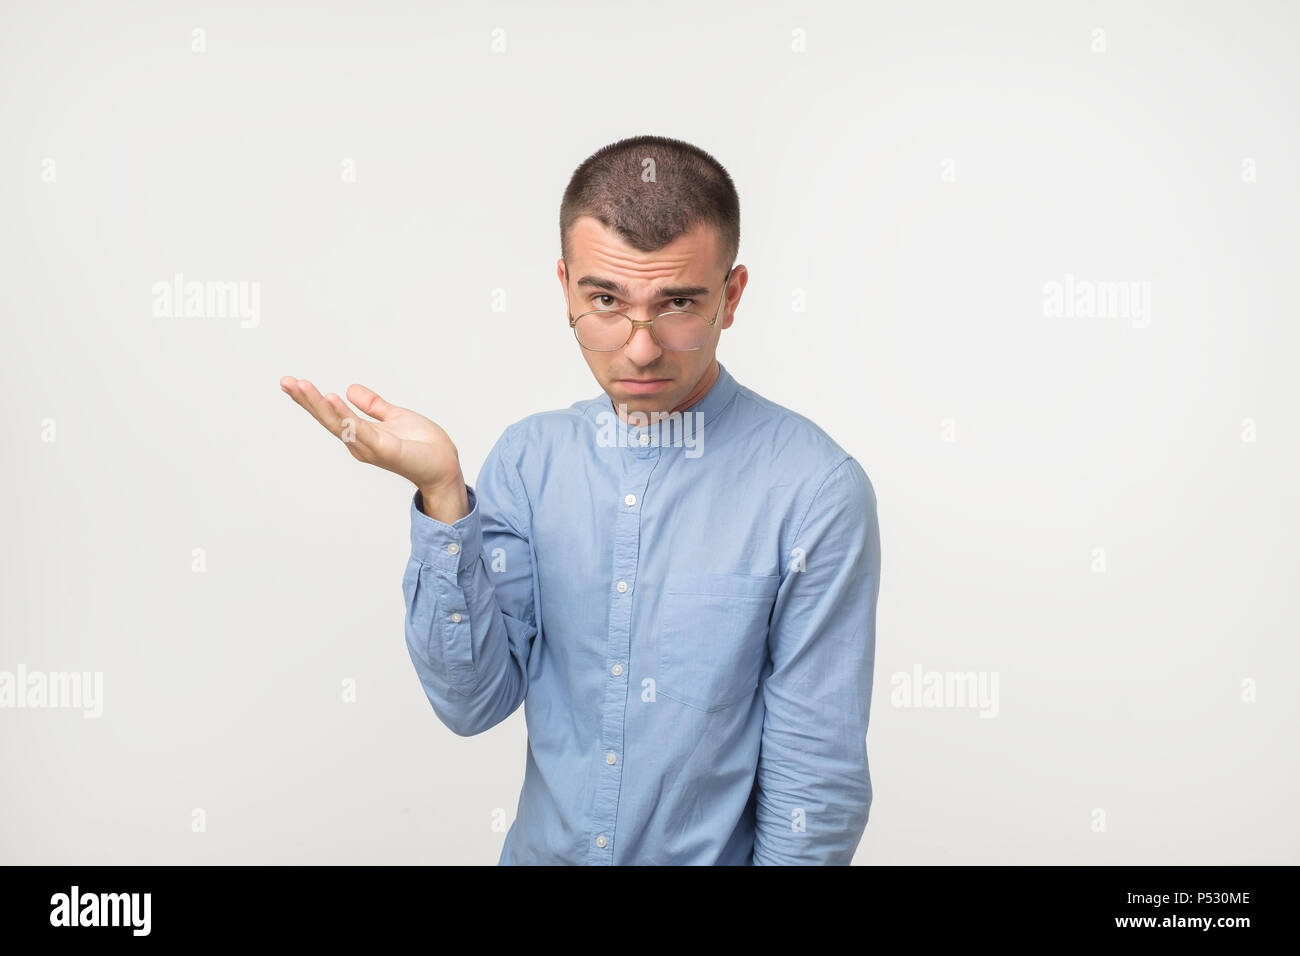 Young man in blue shirt standing disorientated bewildered isolated on gray wall background. Decision making concept. Human facial expression emotions Stock Photo